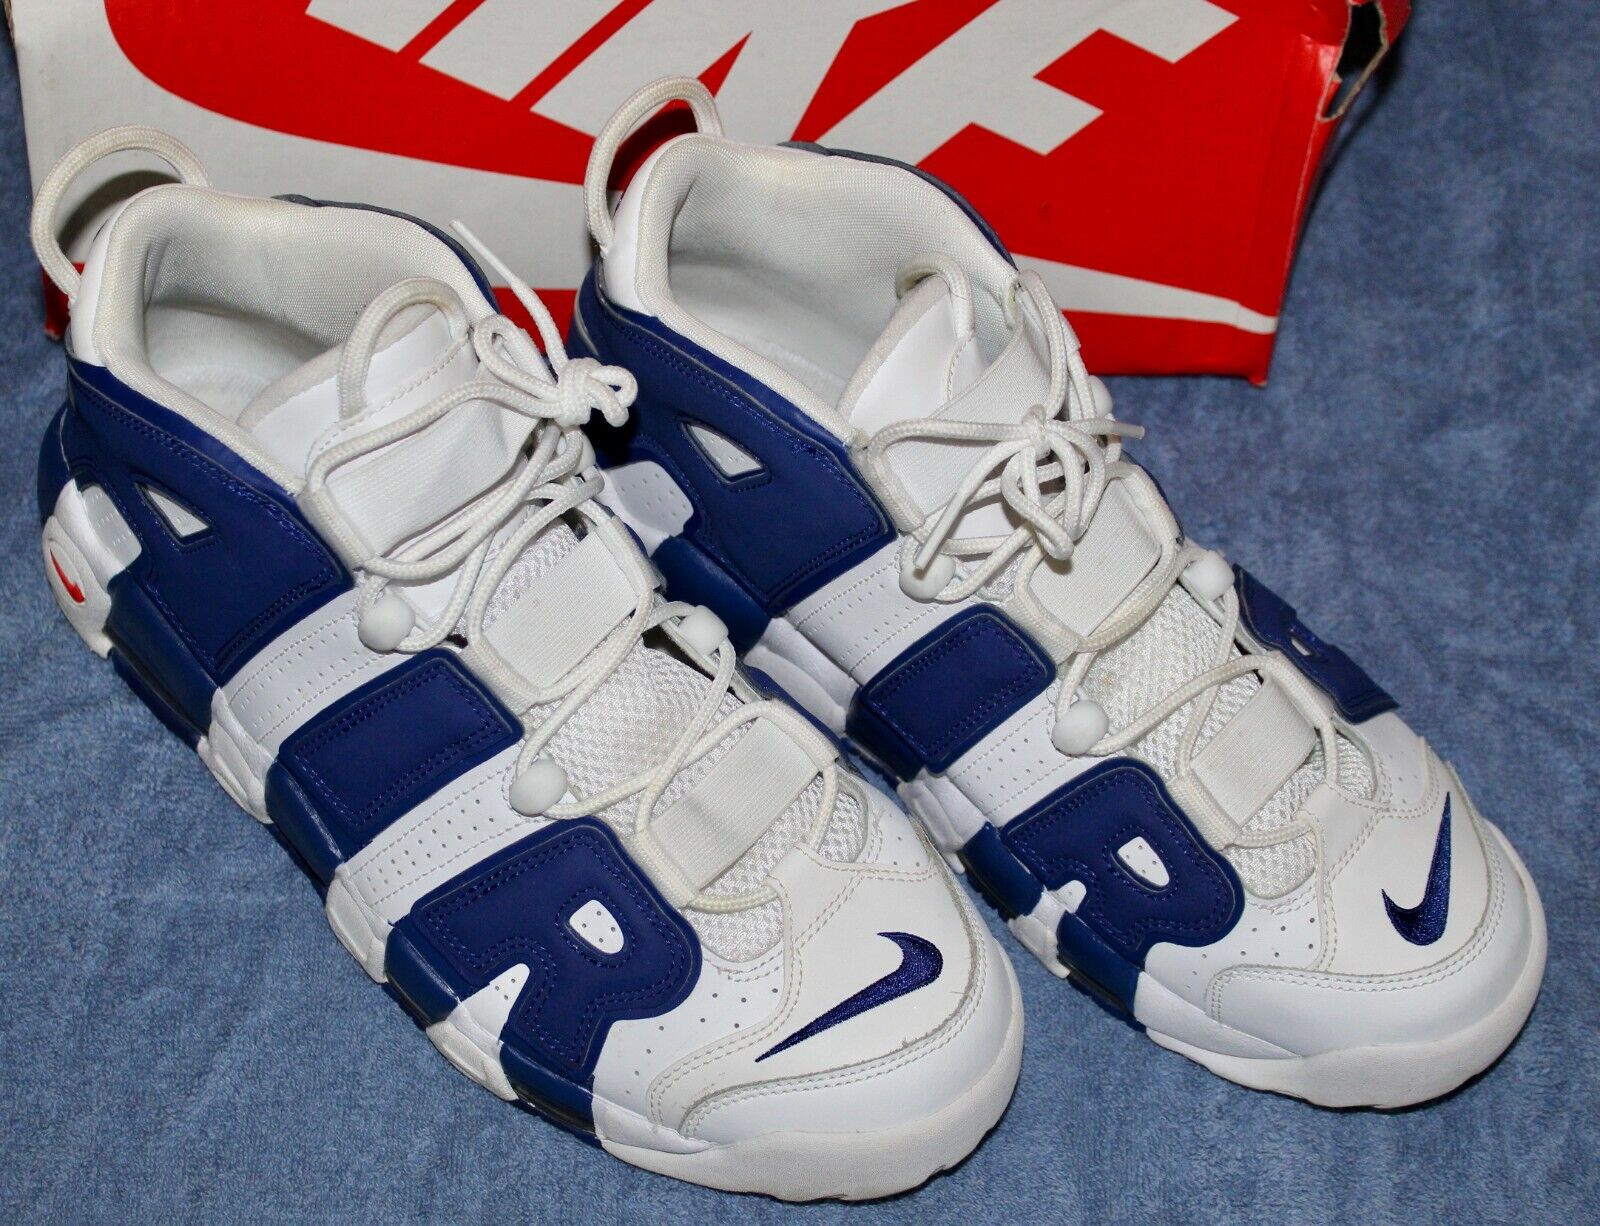 Nike Air More Uptempo 96 New York Knicks Royal Blue 33 Pippen Size 11.5 In  Box